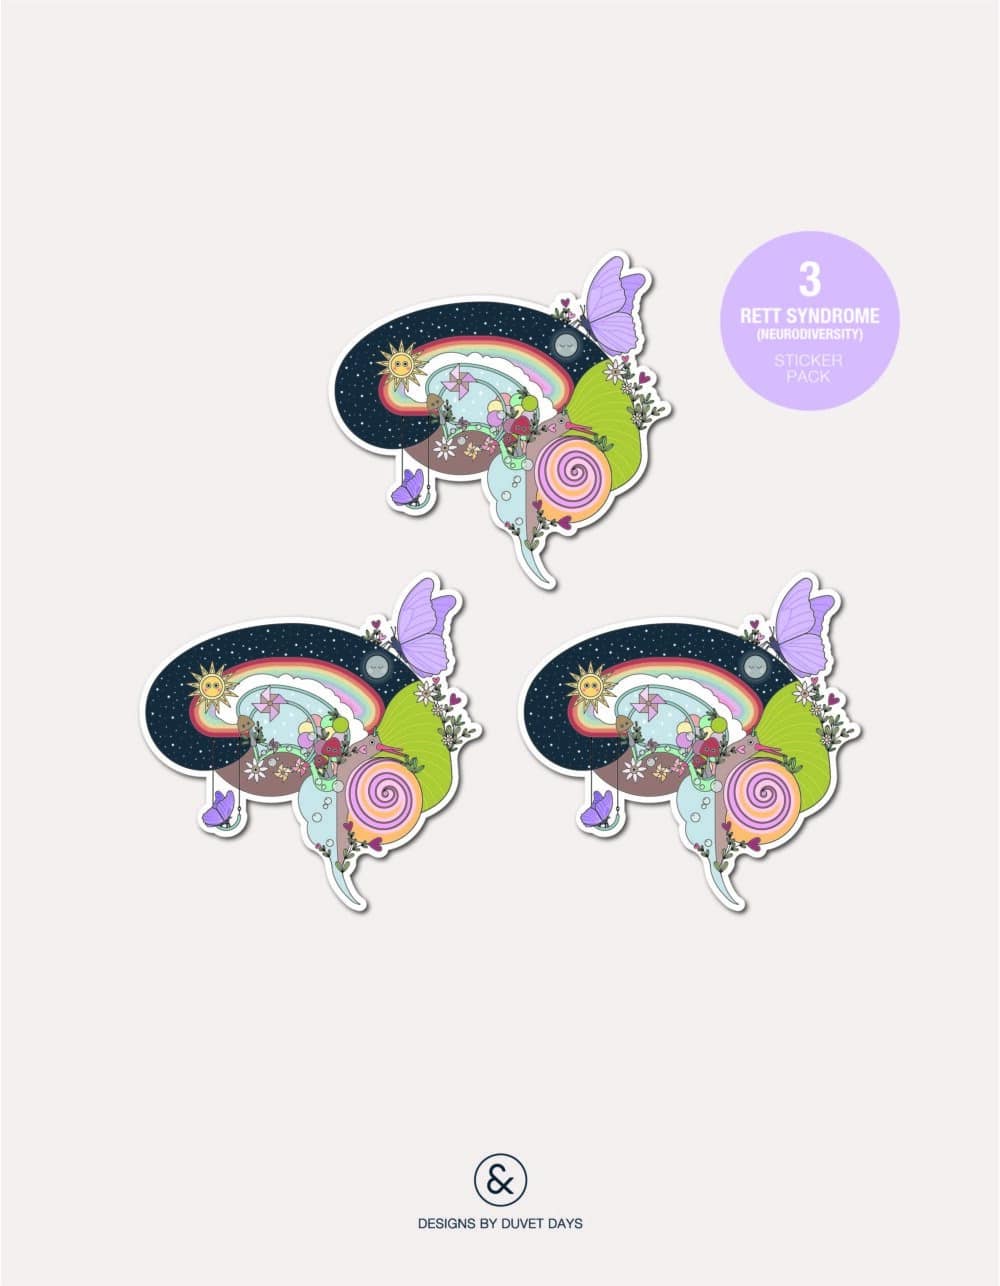 Designs By Duvet Days_3 Pack Stickers_Rett Syndrome